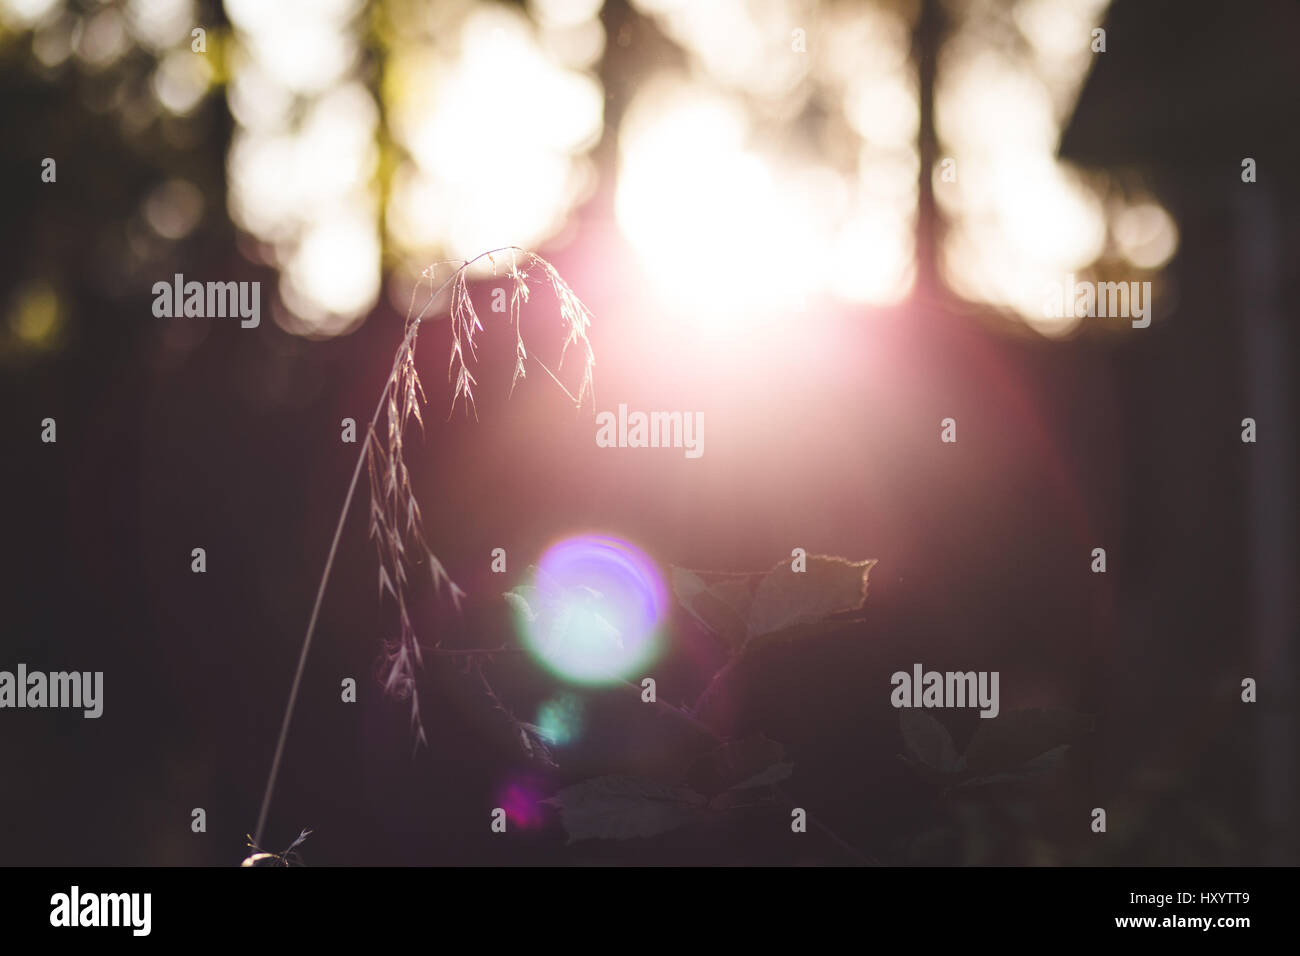 Grass stalk in early morning sunlight. Outdoor morning setting. Stock Photo